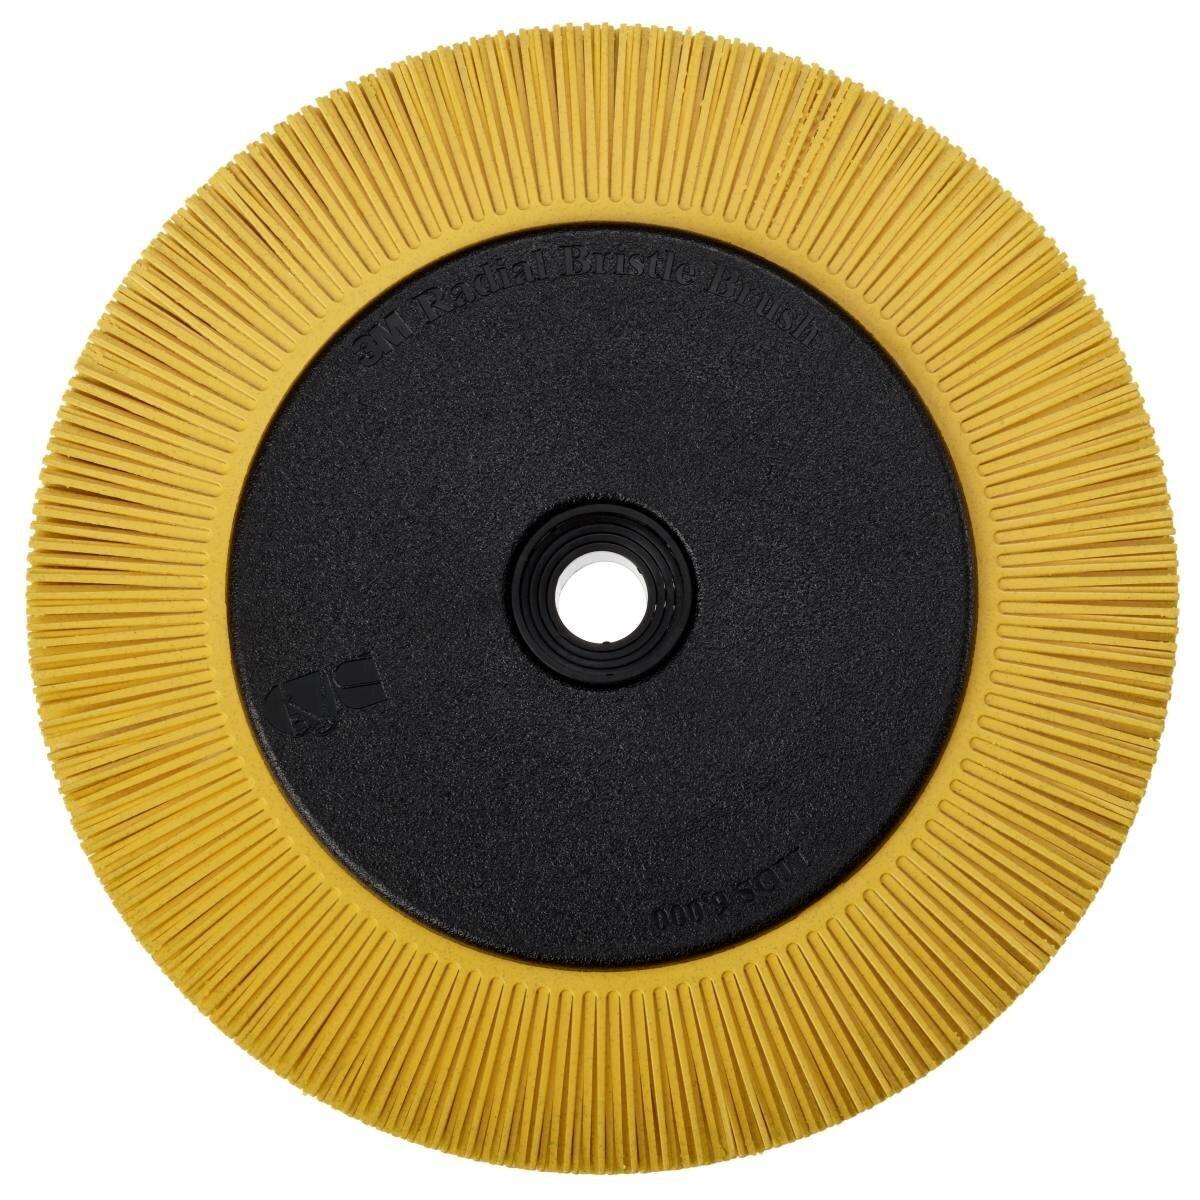 3M Scotch-Brite Radial Bristle Disc BB-ZB with flange, yellow, 203.2 mm, P80, type S #33082